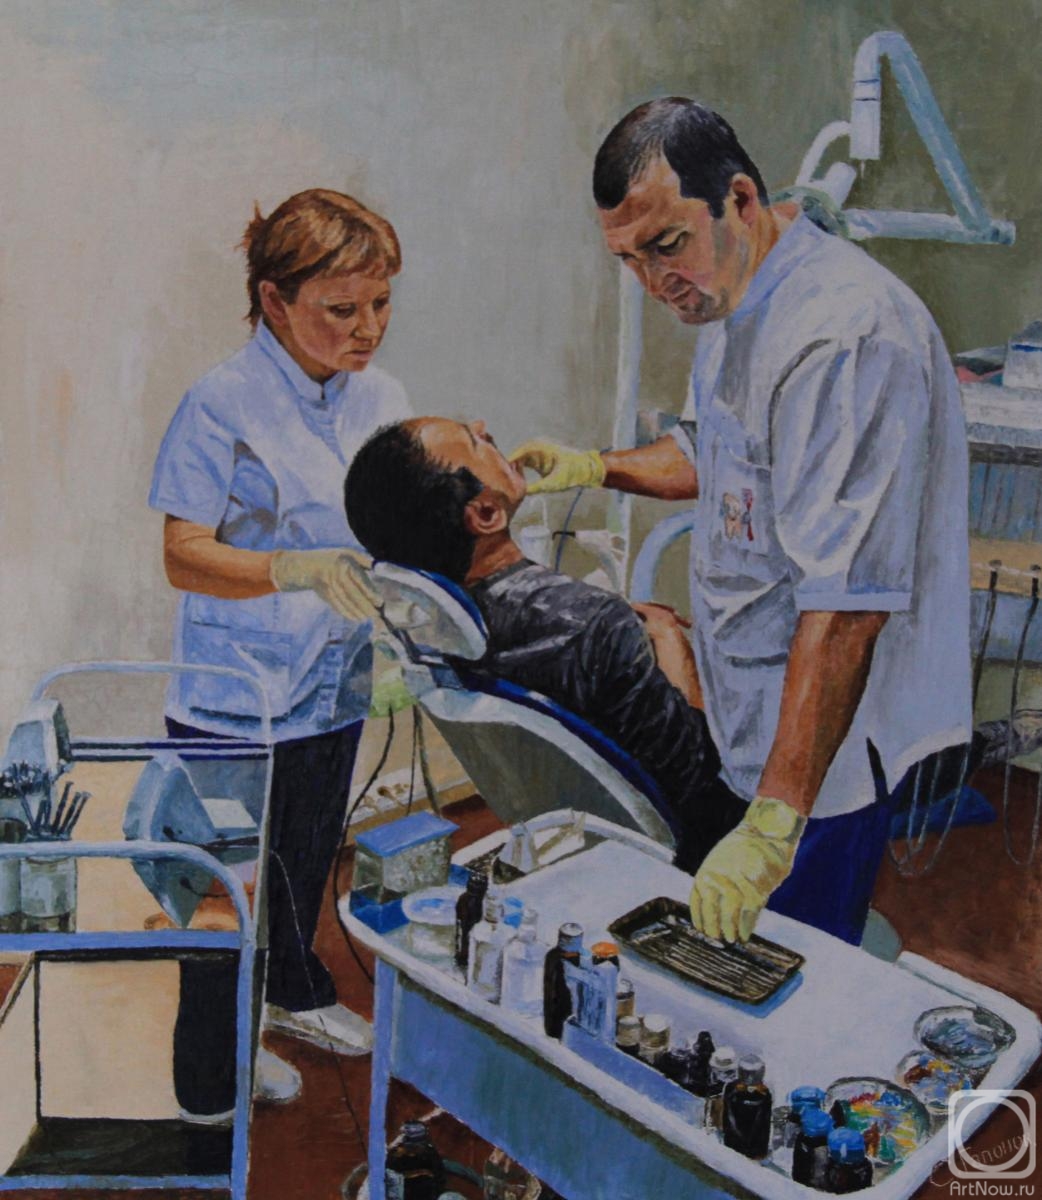 Gaponov Sergey. At the dentist's appointment